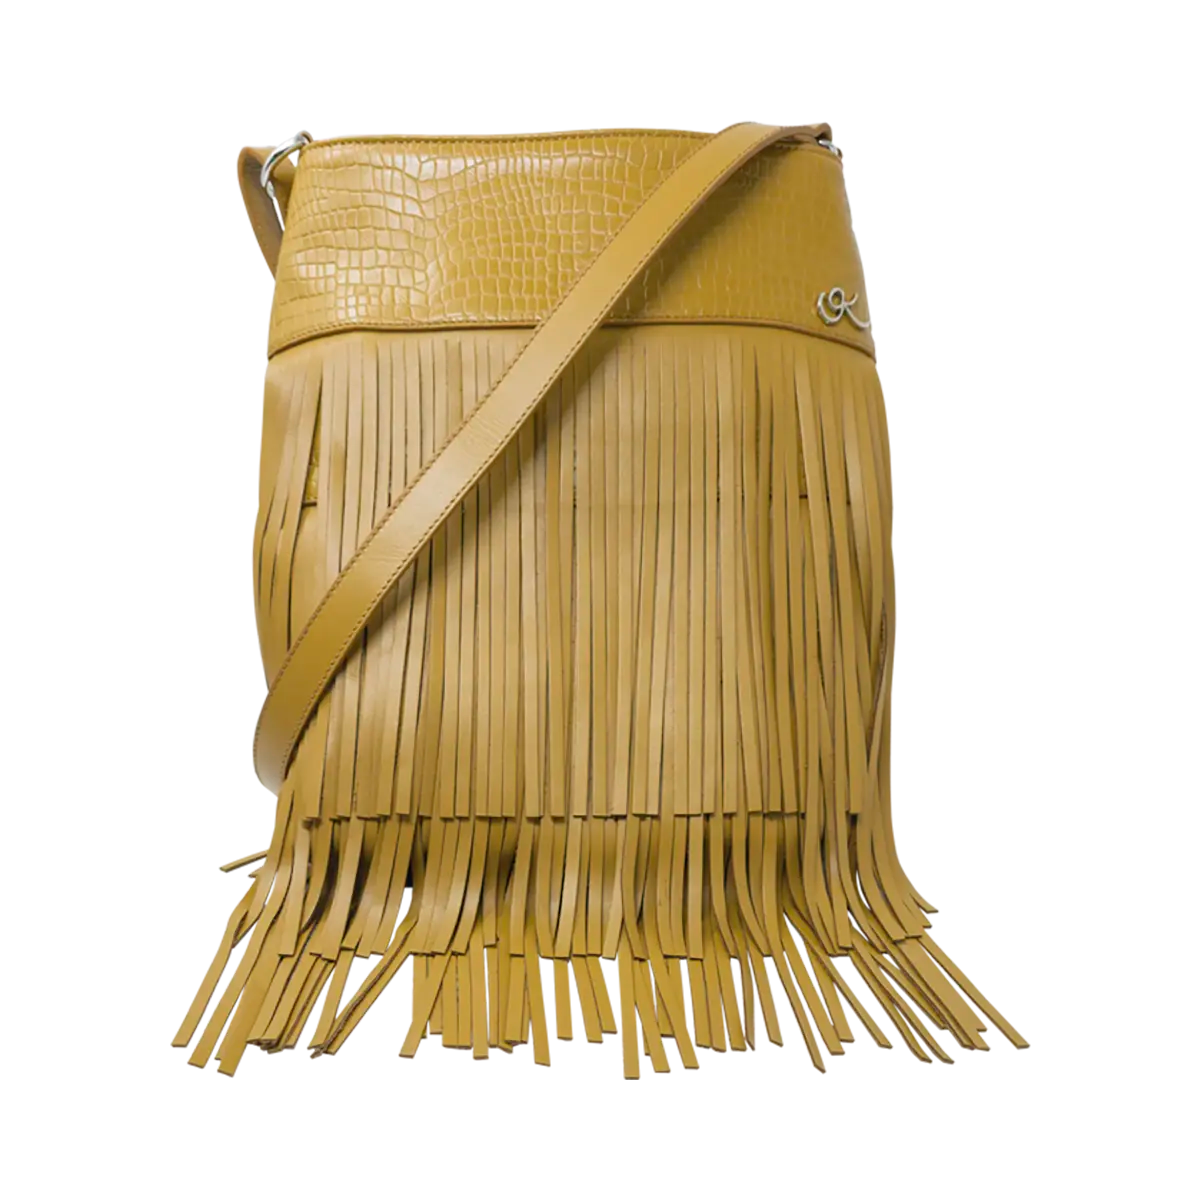 tan leather shoulder bag with 3 layers of fringe. Fashion accessories, for women in San Diego, CA.